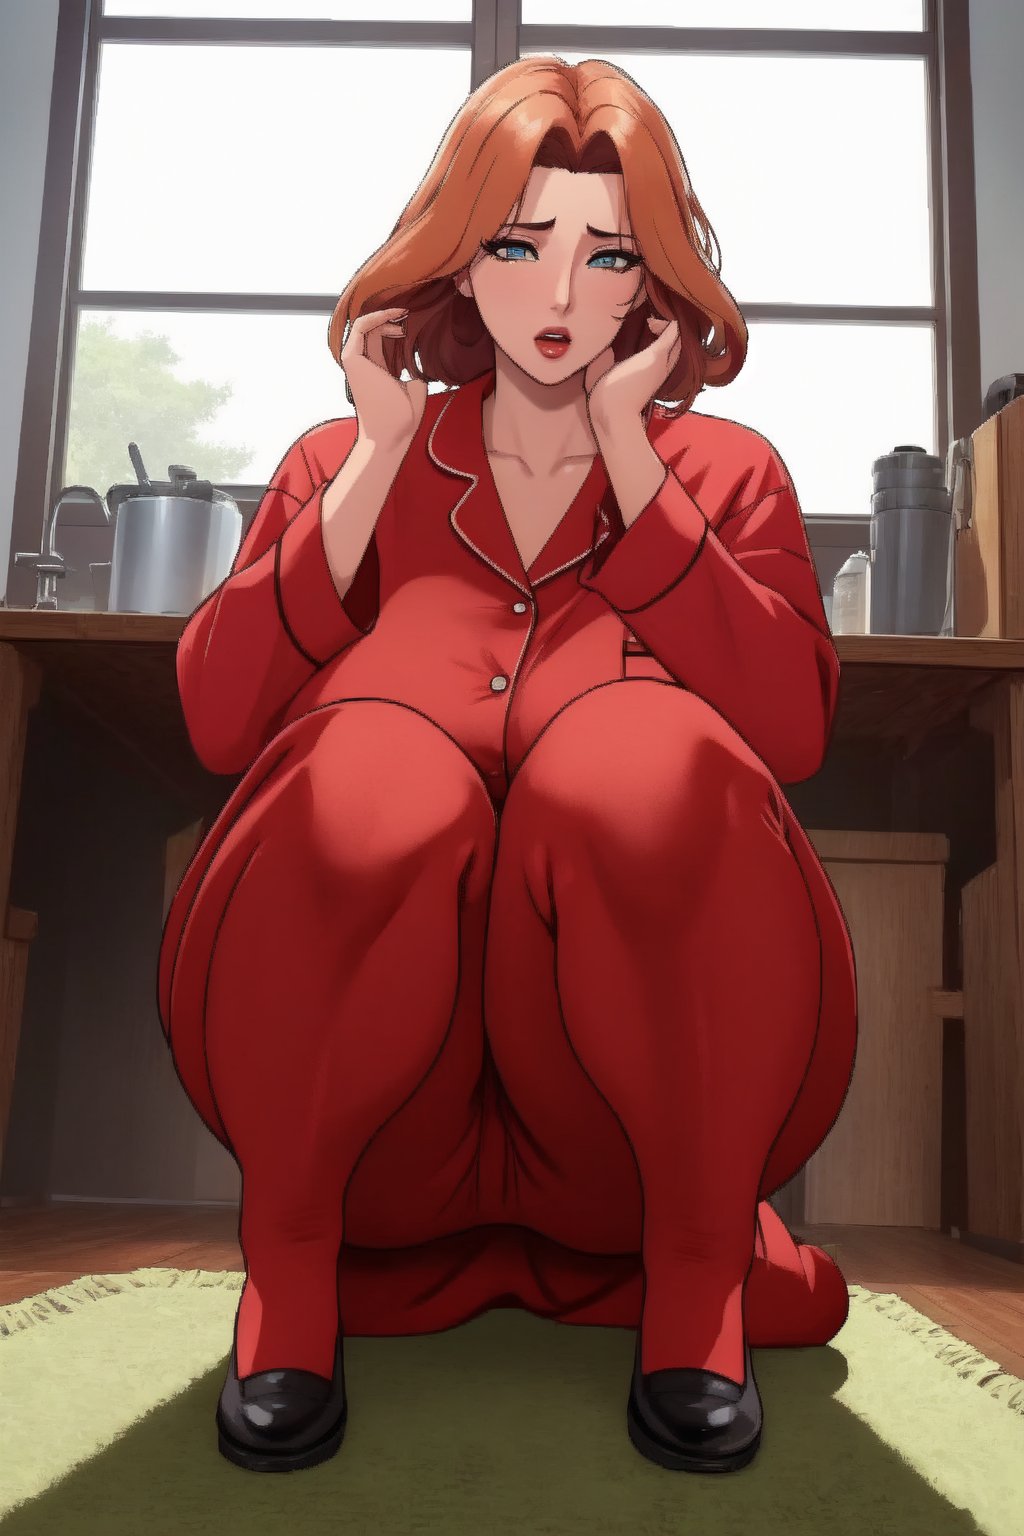 Take a deep breath and let's work step by step on this  ,
Beautifull body,Beautifull butt,a woman sitting on the floor next to a window, youtube thumbnail, pawg, aleriia _ v ( lerapi ), incomprehensible size, hyper cute, wearing a baggy pajamas, it is very huge, full cheeks, 3 / 4 pose, carpet at the floor, uncropped, app, khreschatyk, close photo, dsiao - ron cheng, trending on artstation
,
Midjourney's Consistency, Dynamic Action Pose, Fibonacci Watermark Invisibly Displayed, High-res, Impeccable Composition, Lifelike Details, Perfect Proportions, Stunning Colors, Captivating Lighting, Interesting Subjects, Creative Angle, Attractive Background, Well-timed Moment, Intentional Focus, Balanced Editing, Harmonious Colors, Contemporary Aesthetics, Handcrafted with Precision, Vivid Emotions, Joyful Impact, Exceptional Quality, Powerful Message, Raphael Style, Unreal Engine 5, Octane Render, Isometric, Beautiful Detailed Eyes, Super Detailed Face and Eyes and Clothes, More Detail, Multi Colored, Splash Ink Illustration, Grammer Effect Style, Houdini Style, Sharp Lines and Brush Strokes, High Quality, Beautiful Matte Painting, 4K, CGSociety, Artstation Trending on ArtstationHQ,masterpiece,chibi